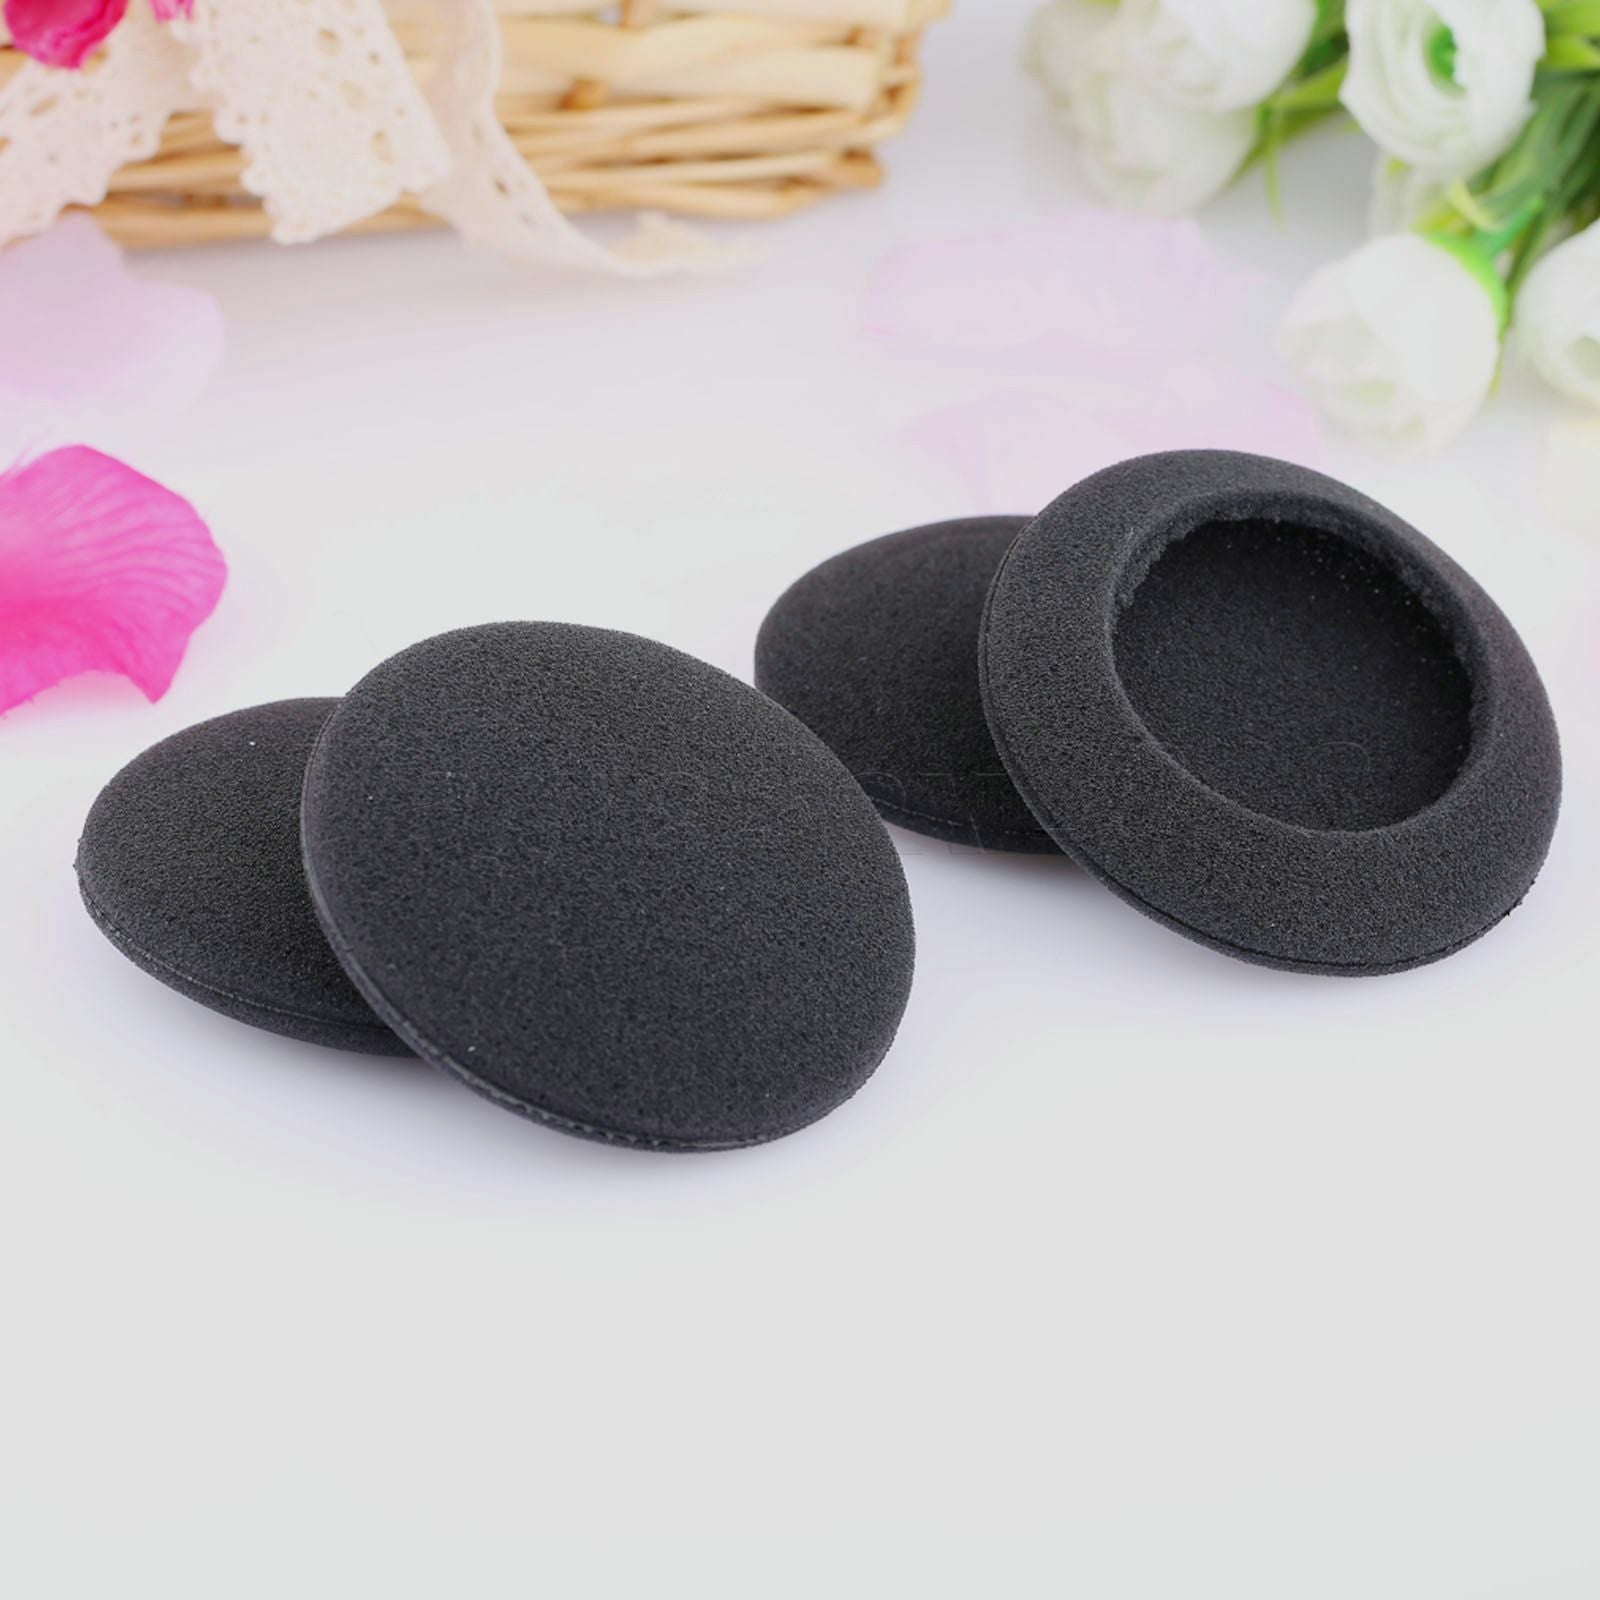 4x Replacement Headphone Pads 60mm 2.36" Headset Earphone Foam Earpads Cup Cover